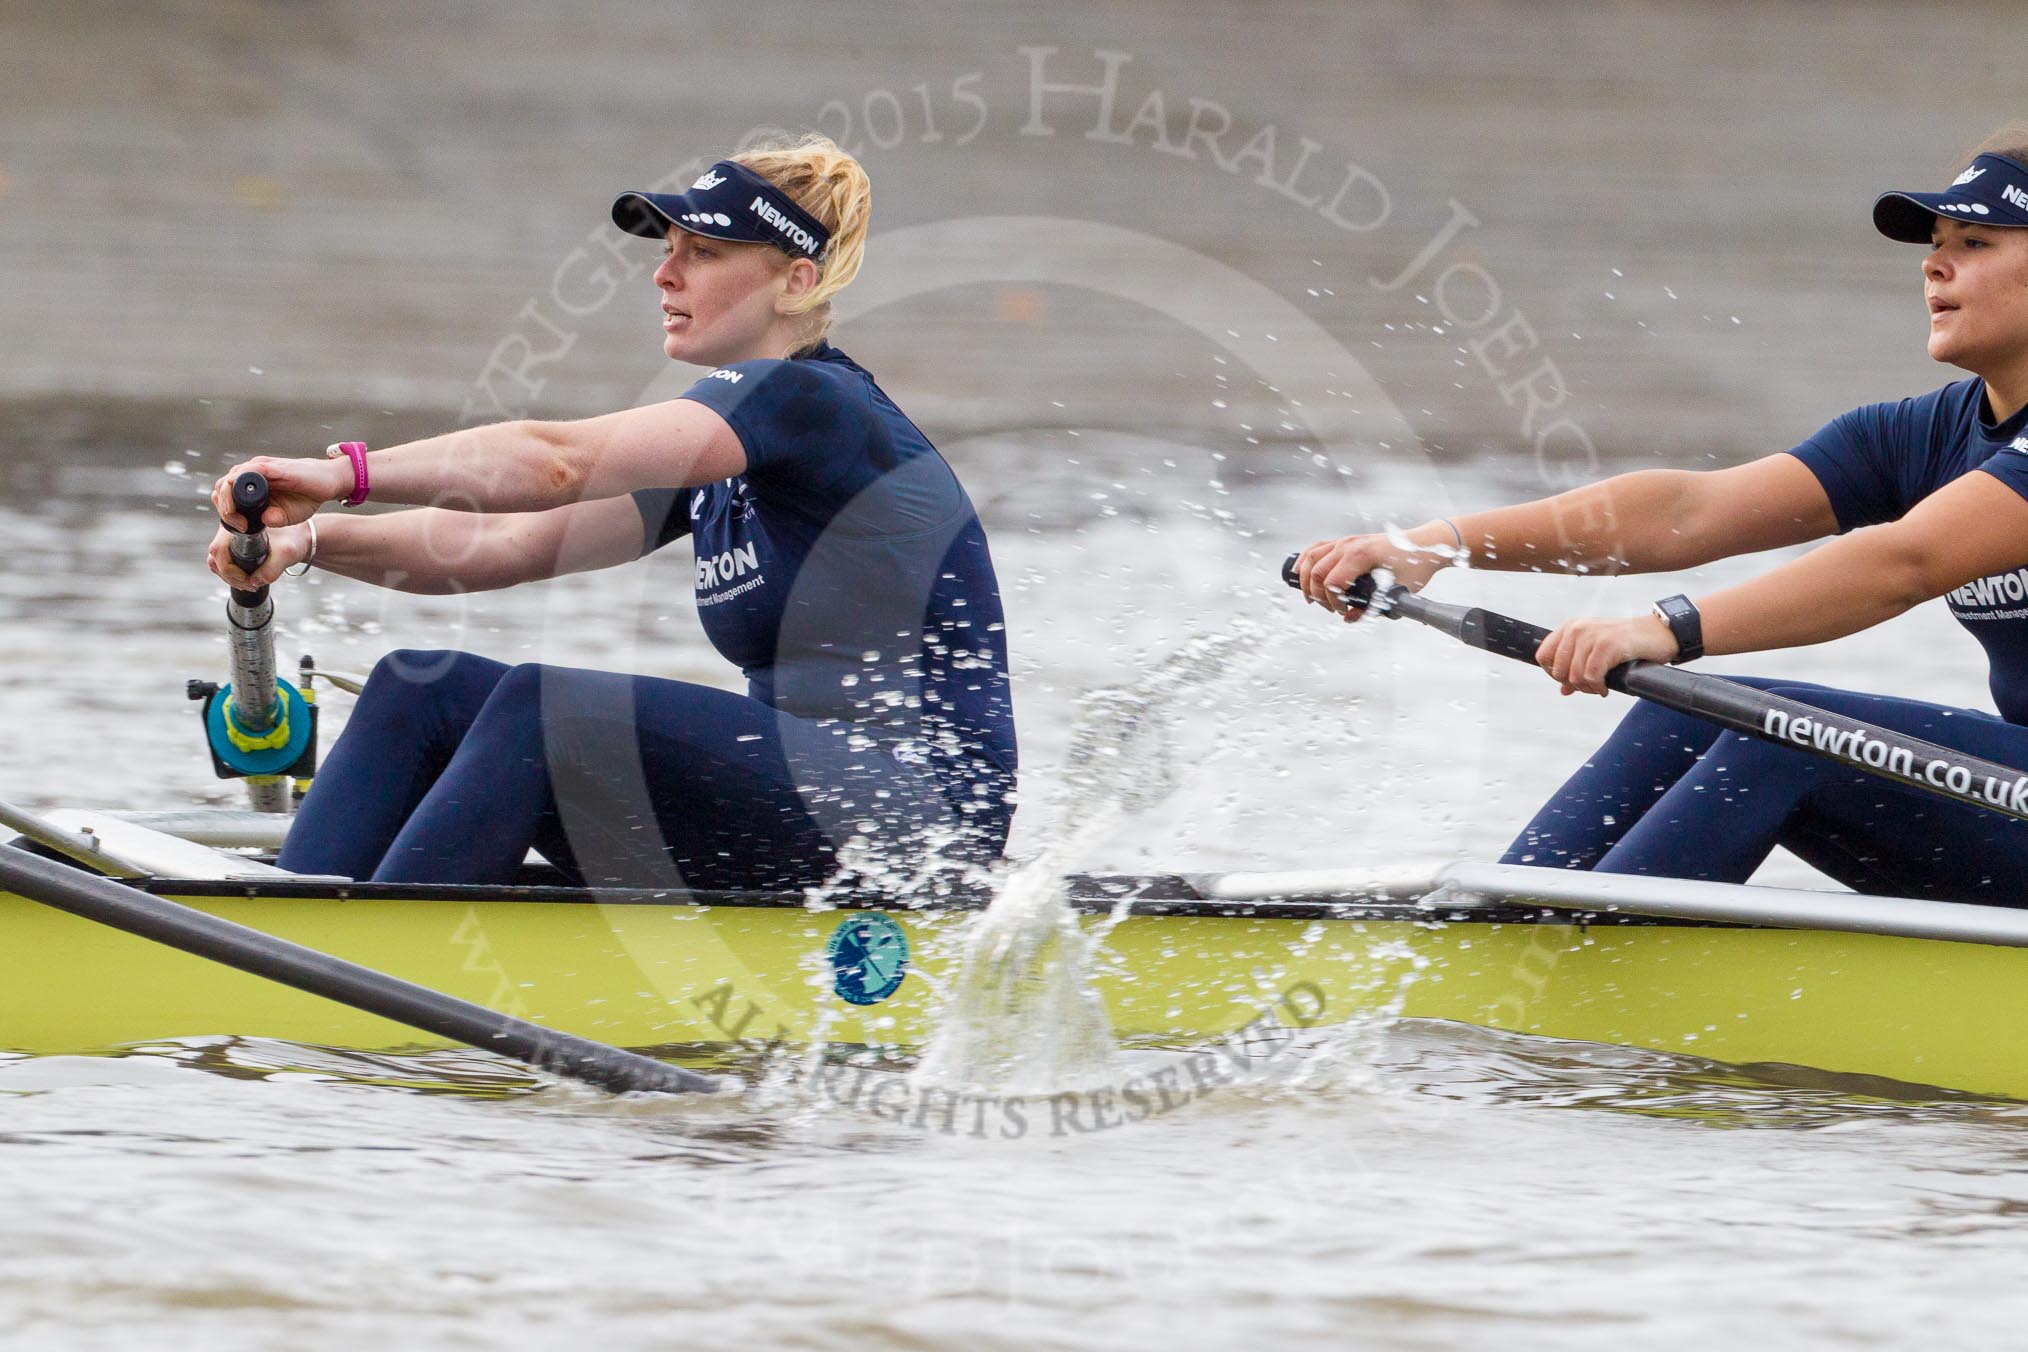 The Boat Race season 2016 - Women's Boat Race Trial Eights (OUWBC, Oxford): "Charybdis", here 4-Emma Spruce, 3-Lara Pysden.
River Thames between Putney Bridge and Mortlake,
London SW15,

United Kingdom,
on 10 December 2015 at 12:19, image #157